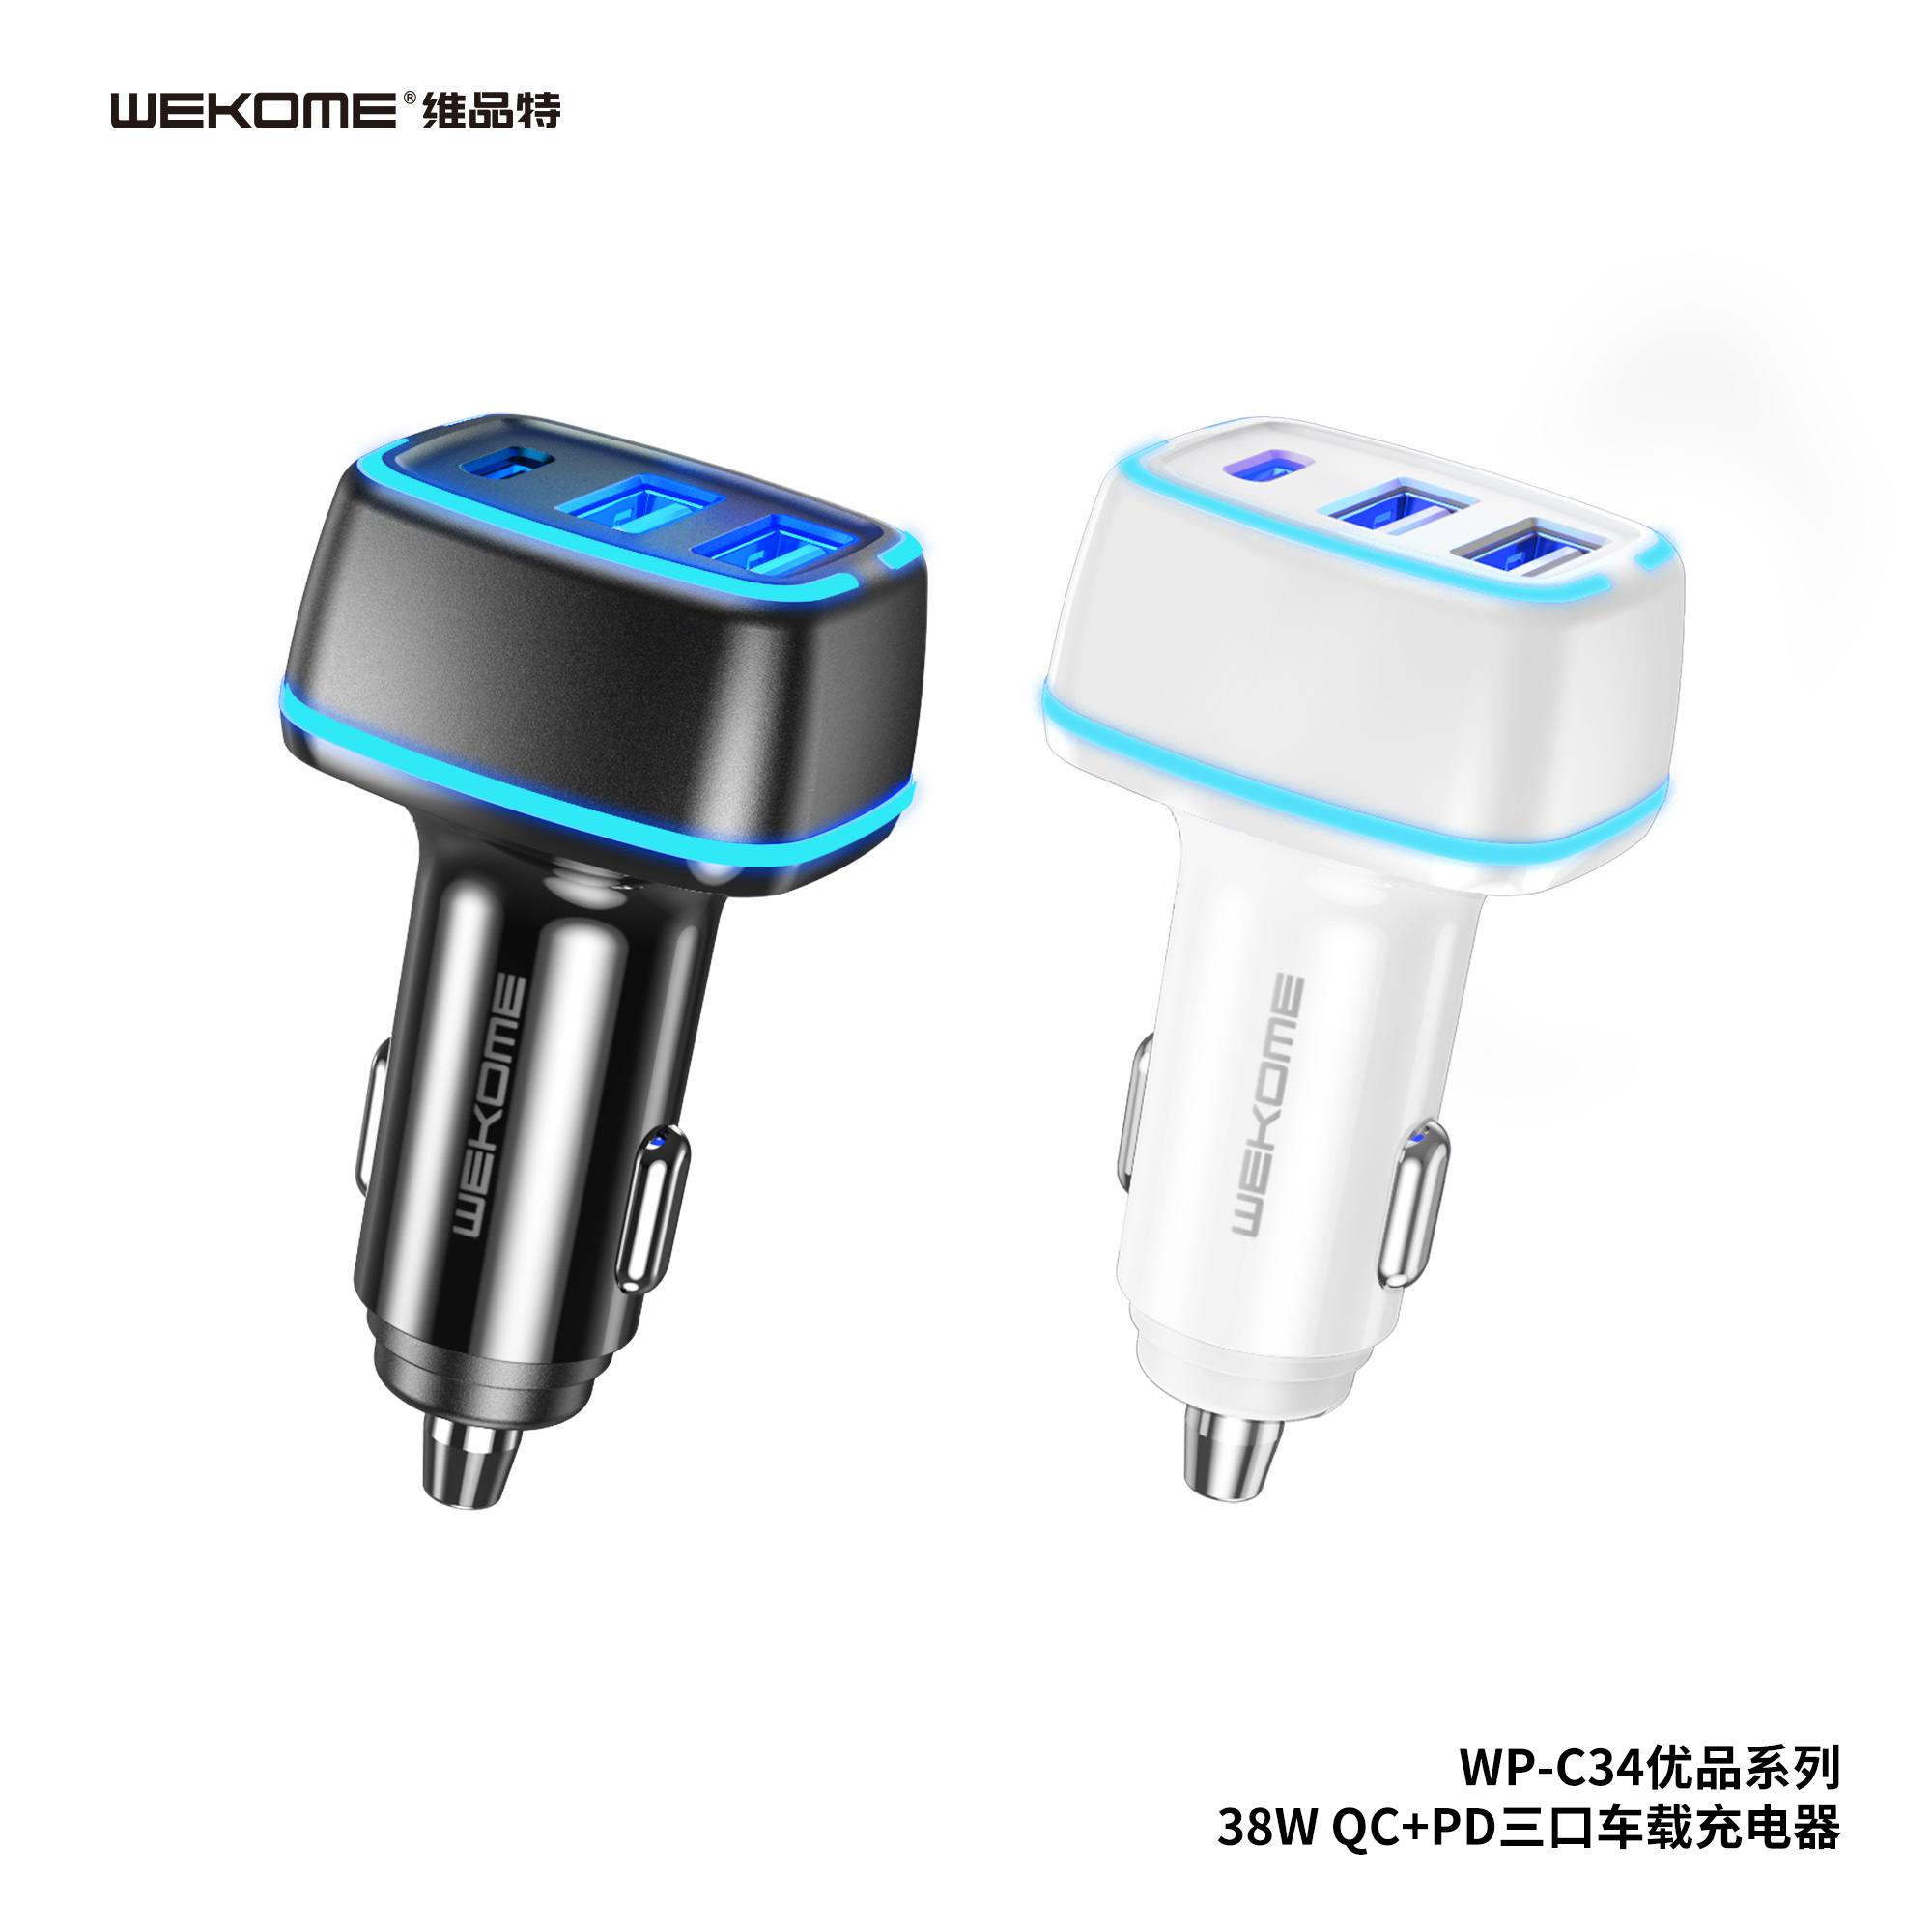 Upine series 38W QC+PD 3-Port Car Charger  